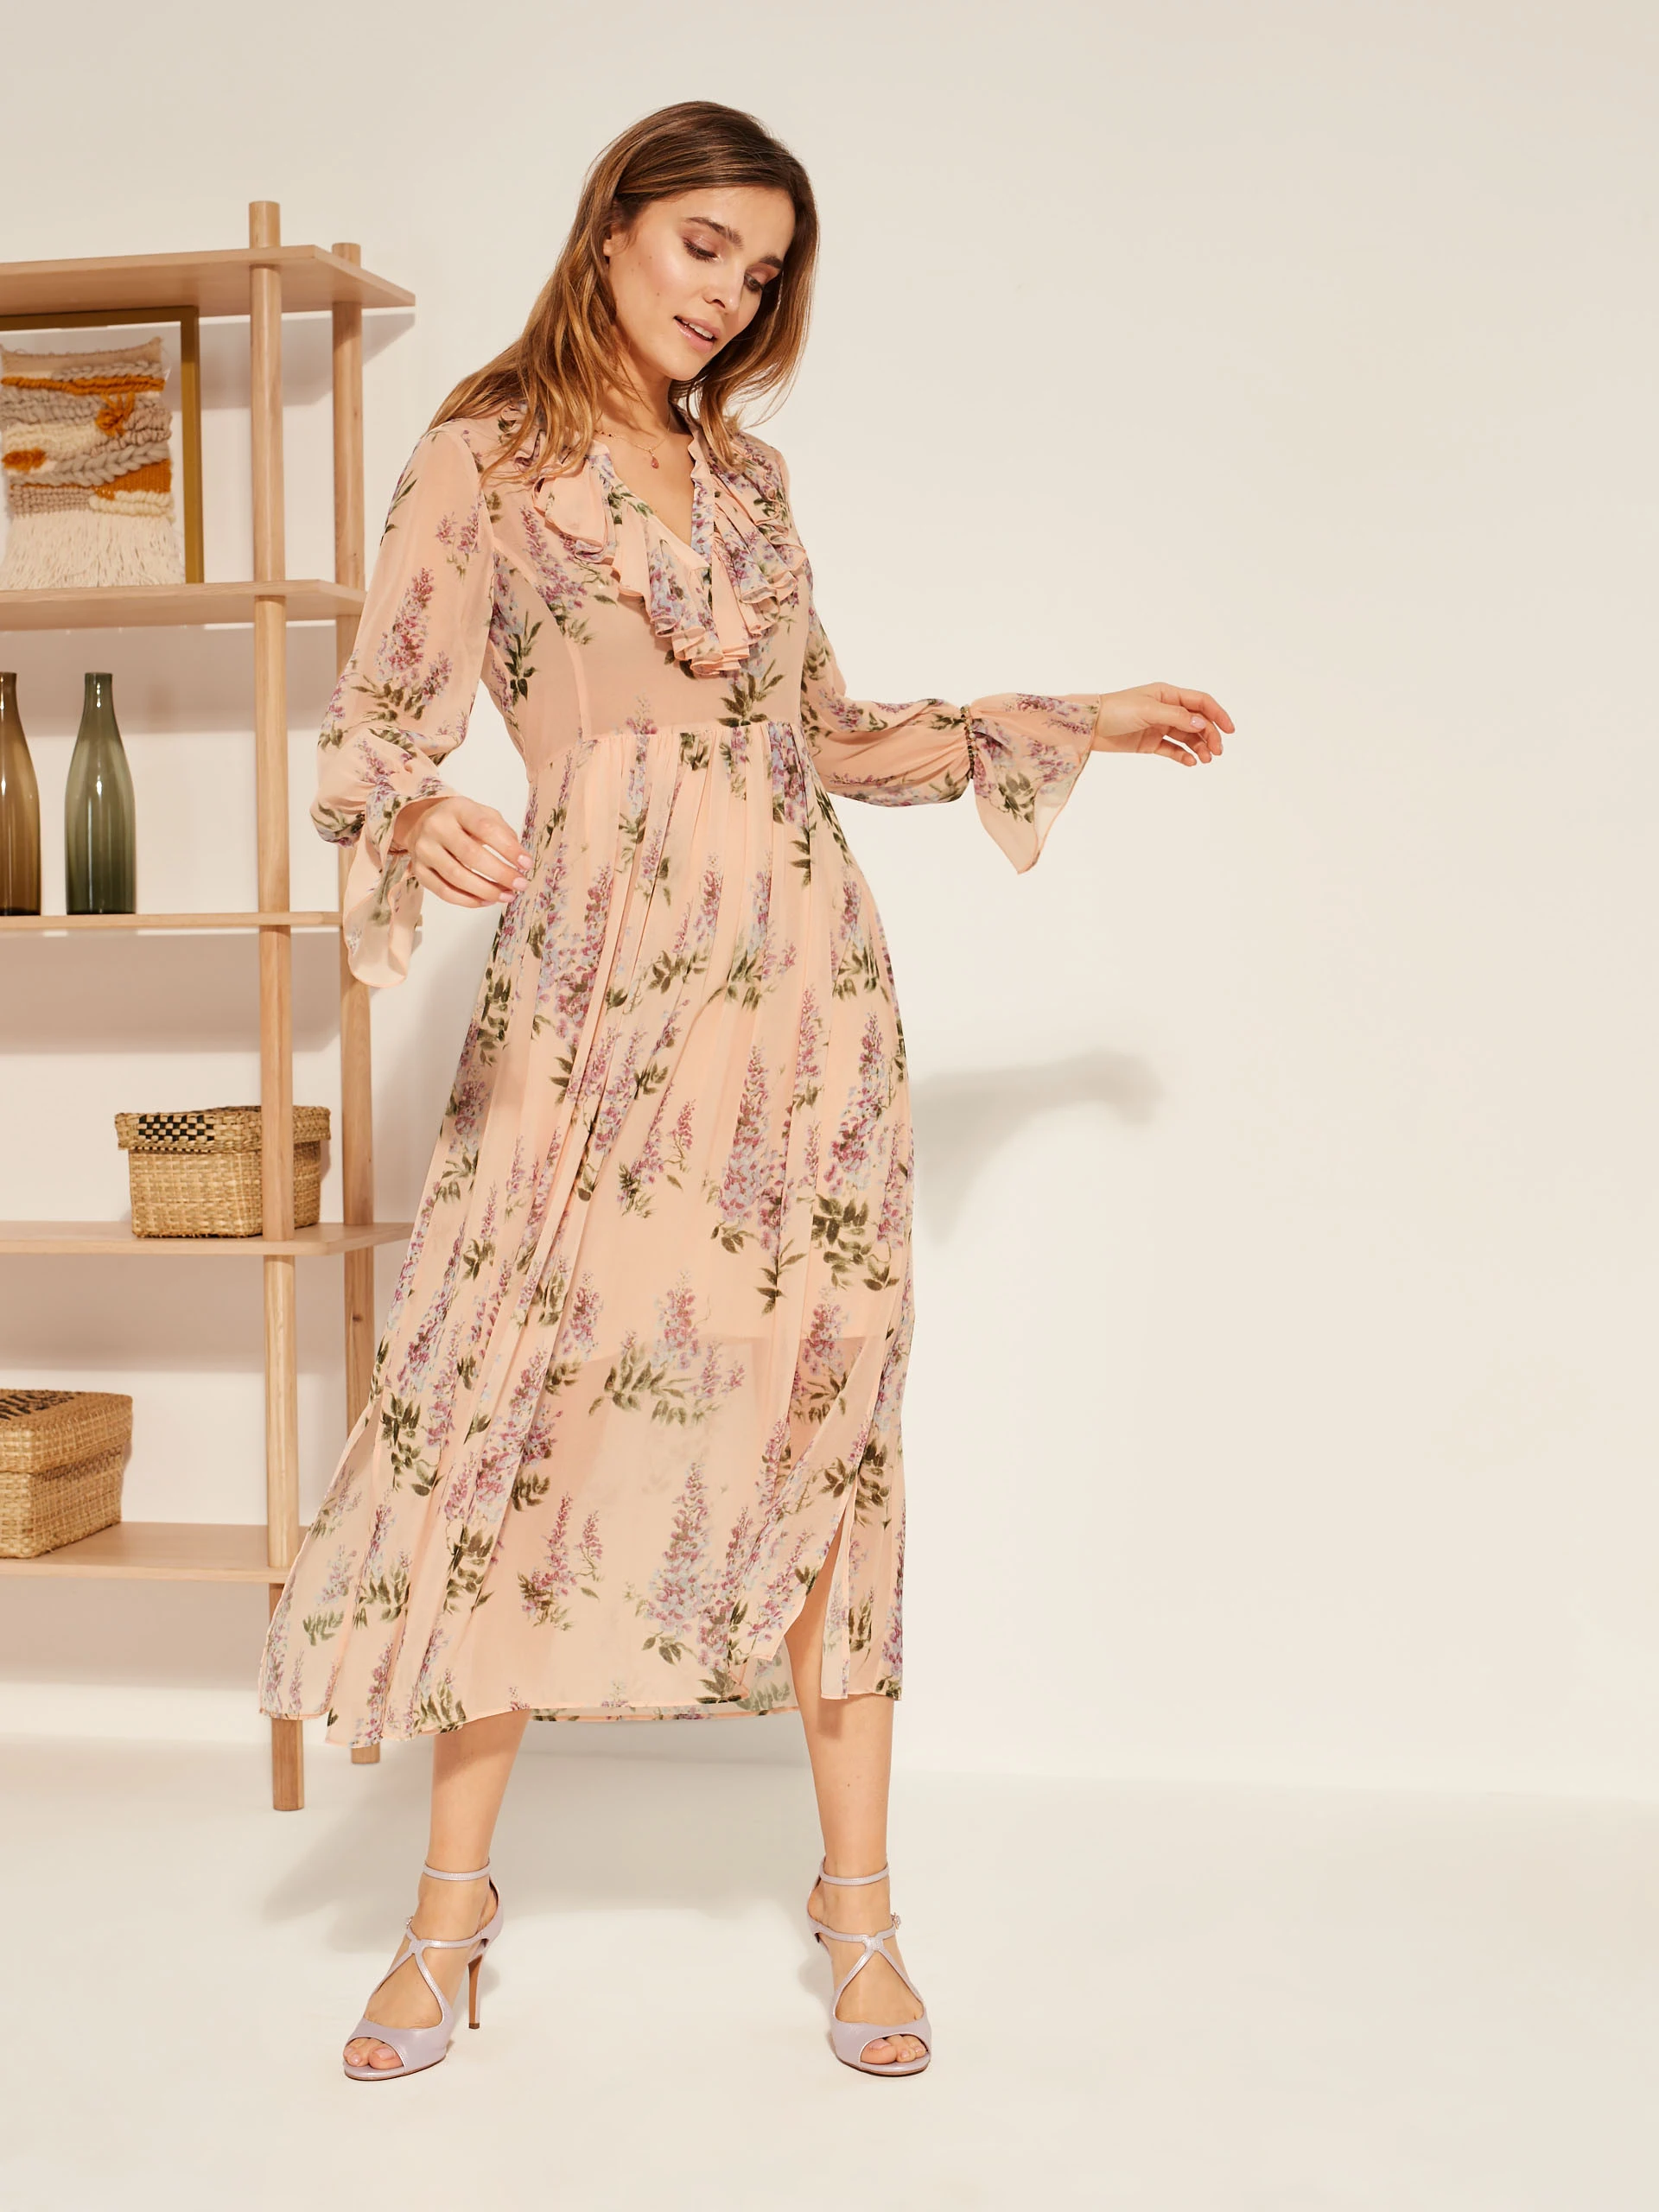 ETHEREAL FLORAL PATTERN DRESS